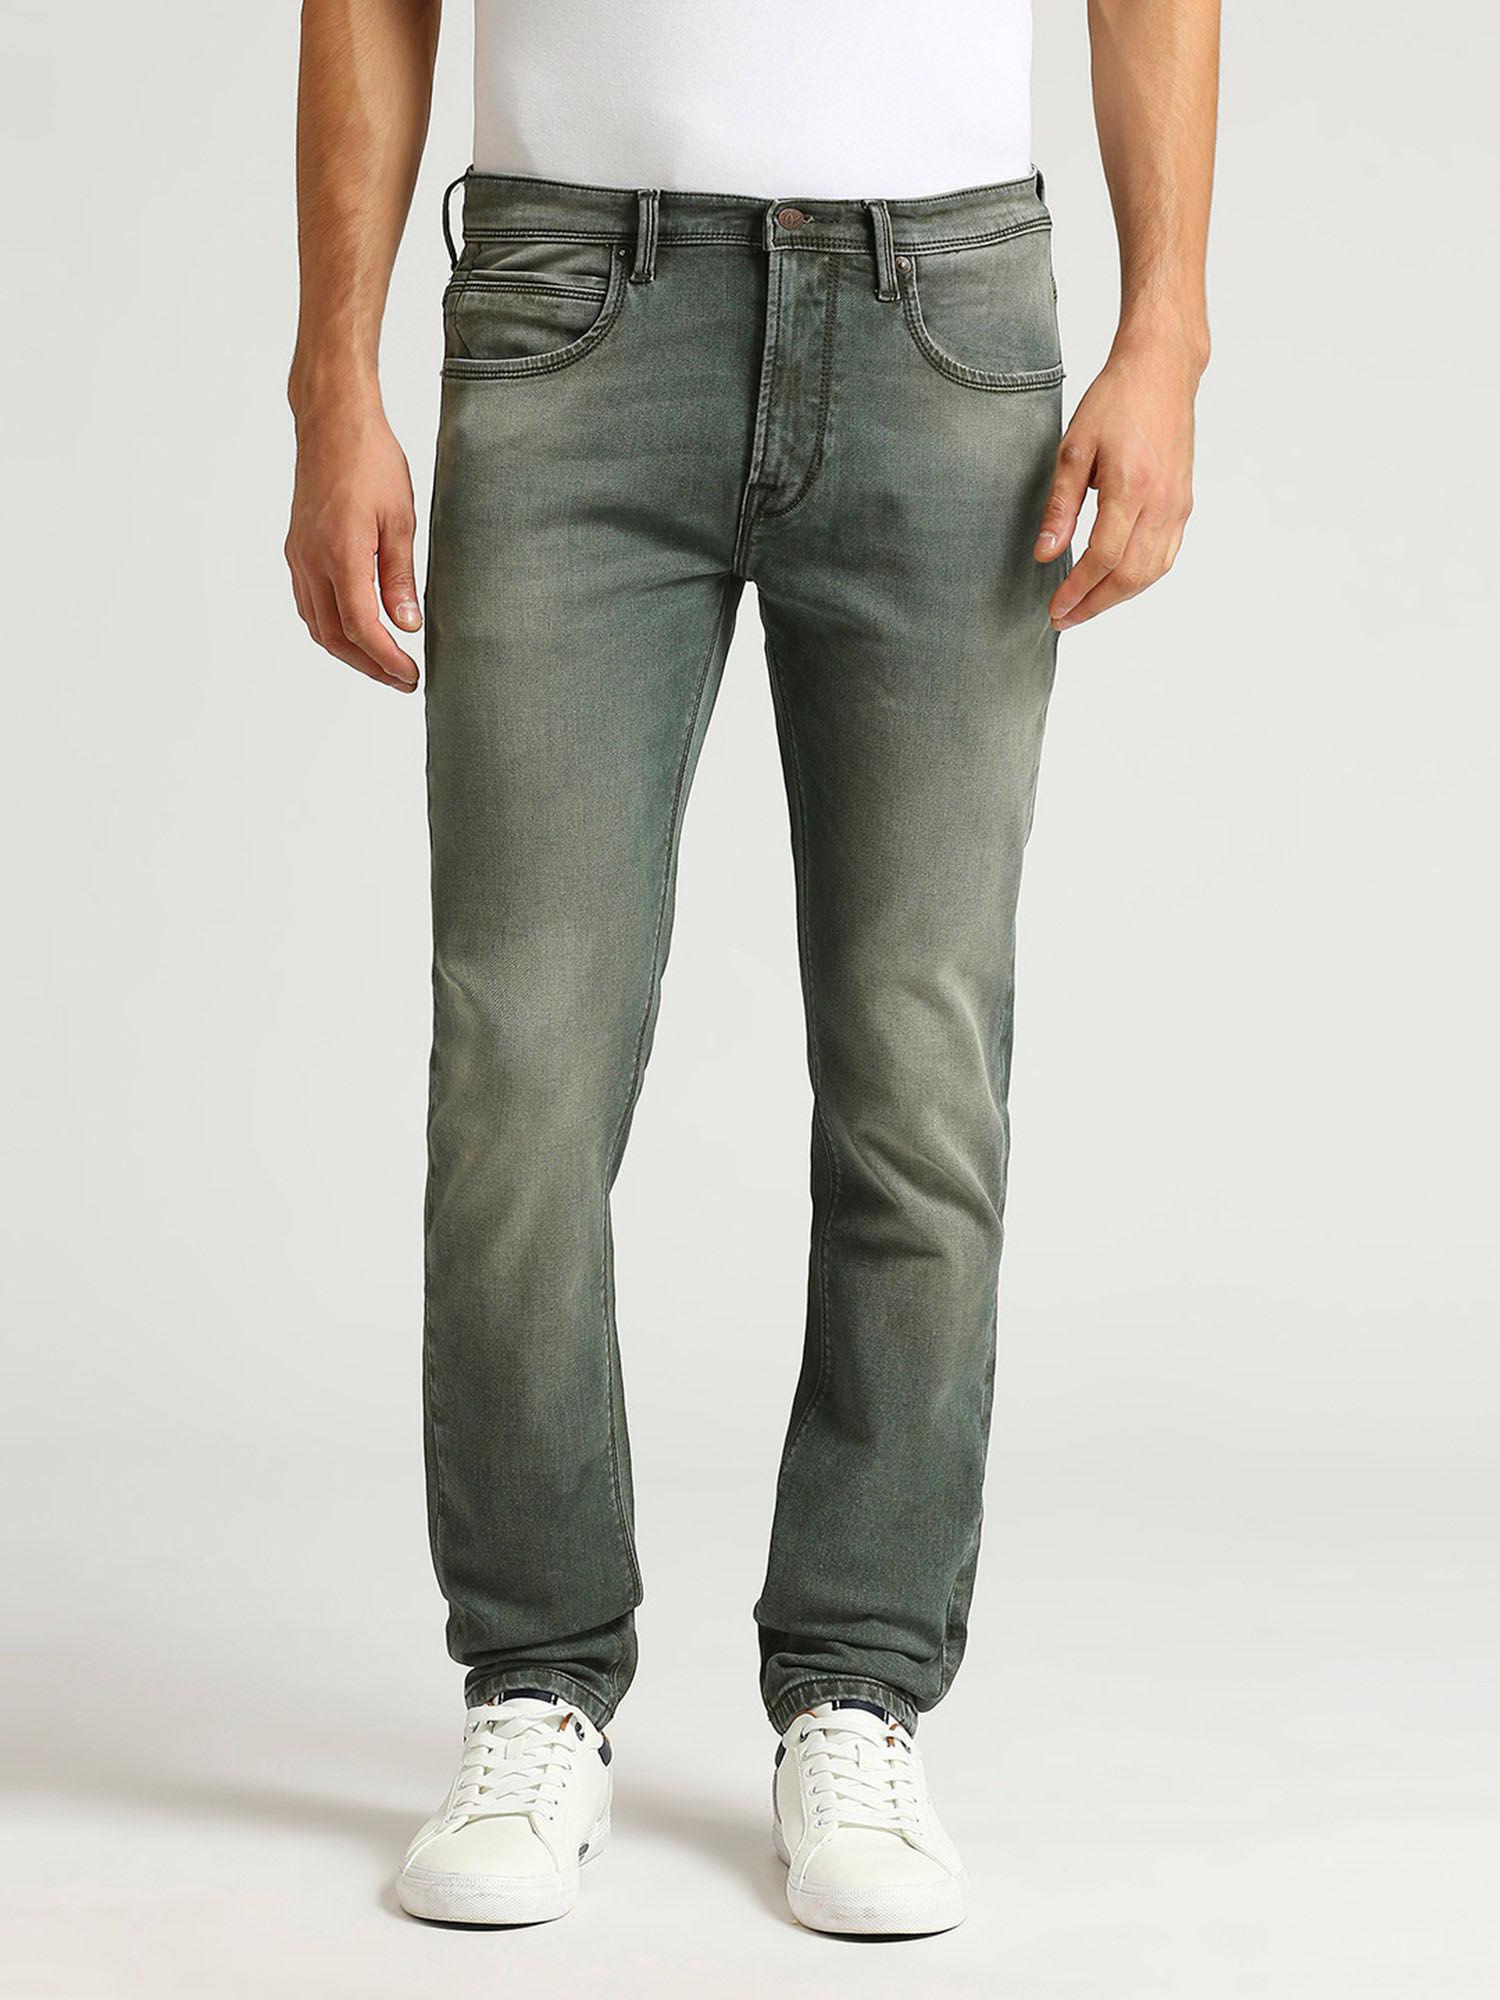 grey vapour tapered fit low waist jeans